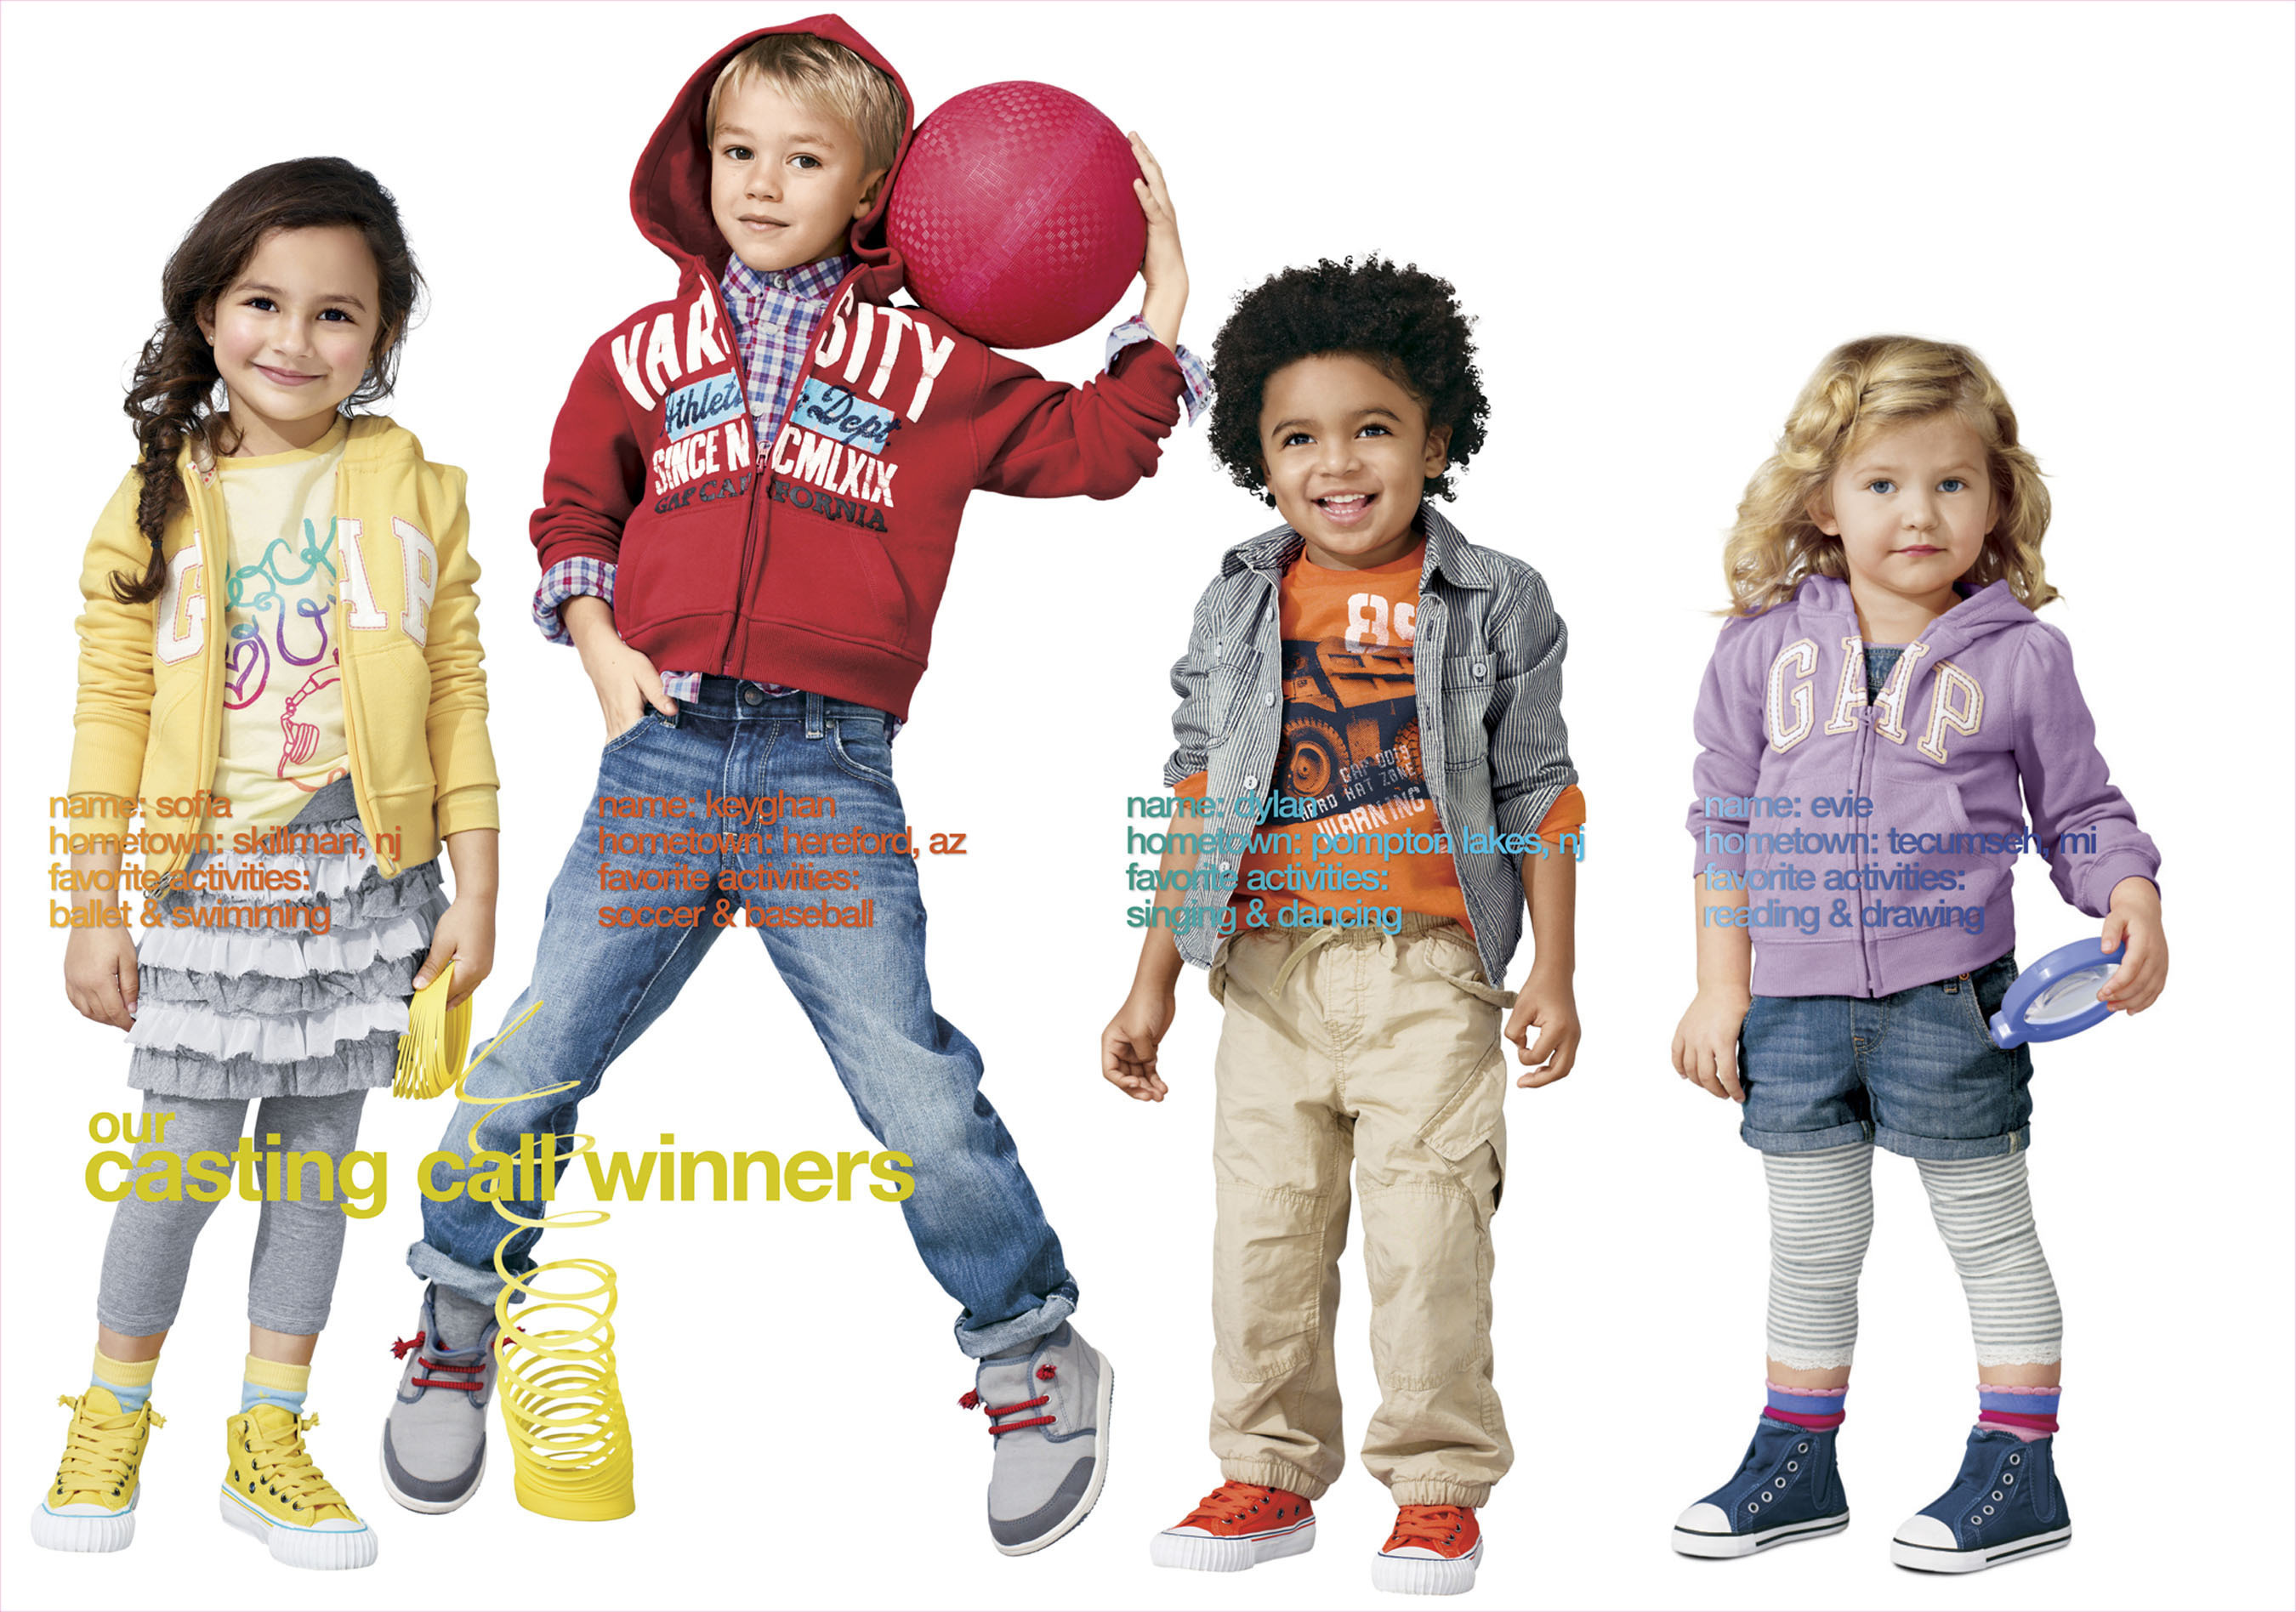 Gap Unveils 2010 Casting Call Winners in babyGap and GapKids Stores  Nationwide